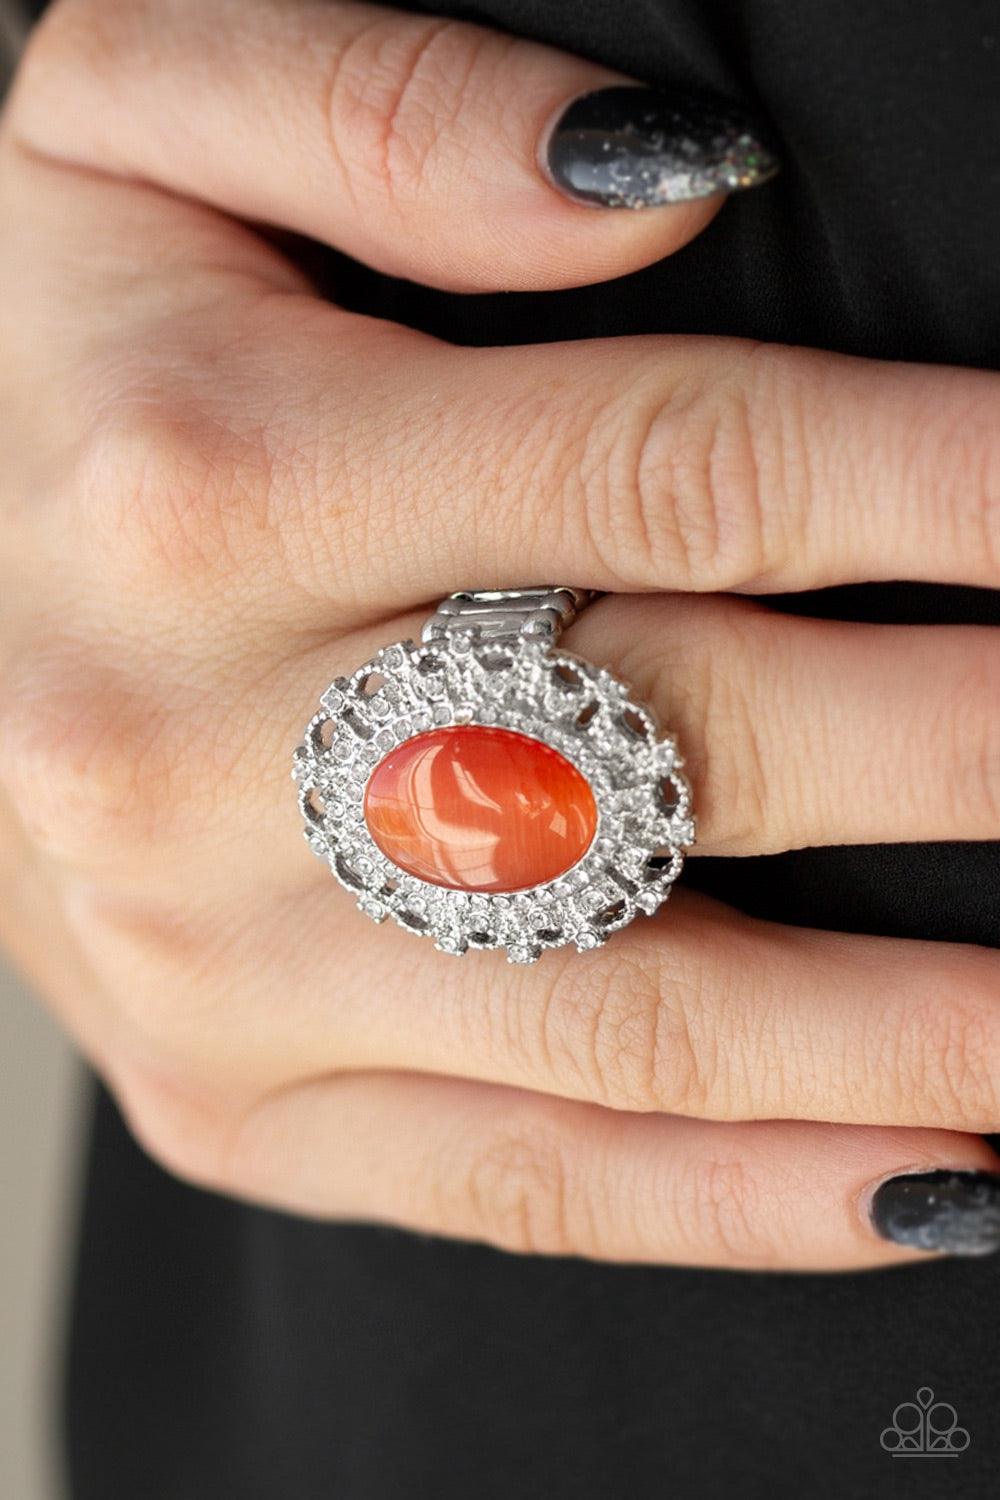 Paparazzi Accessories BAROQUE The Spell - Orange Encrusted in dainty white rhinestones, a frilly silver frame spins around a glowing orange moonstone center for a regal look. Features a stretchy band for a flexible fit. Jewelry